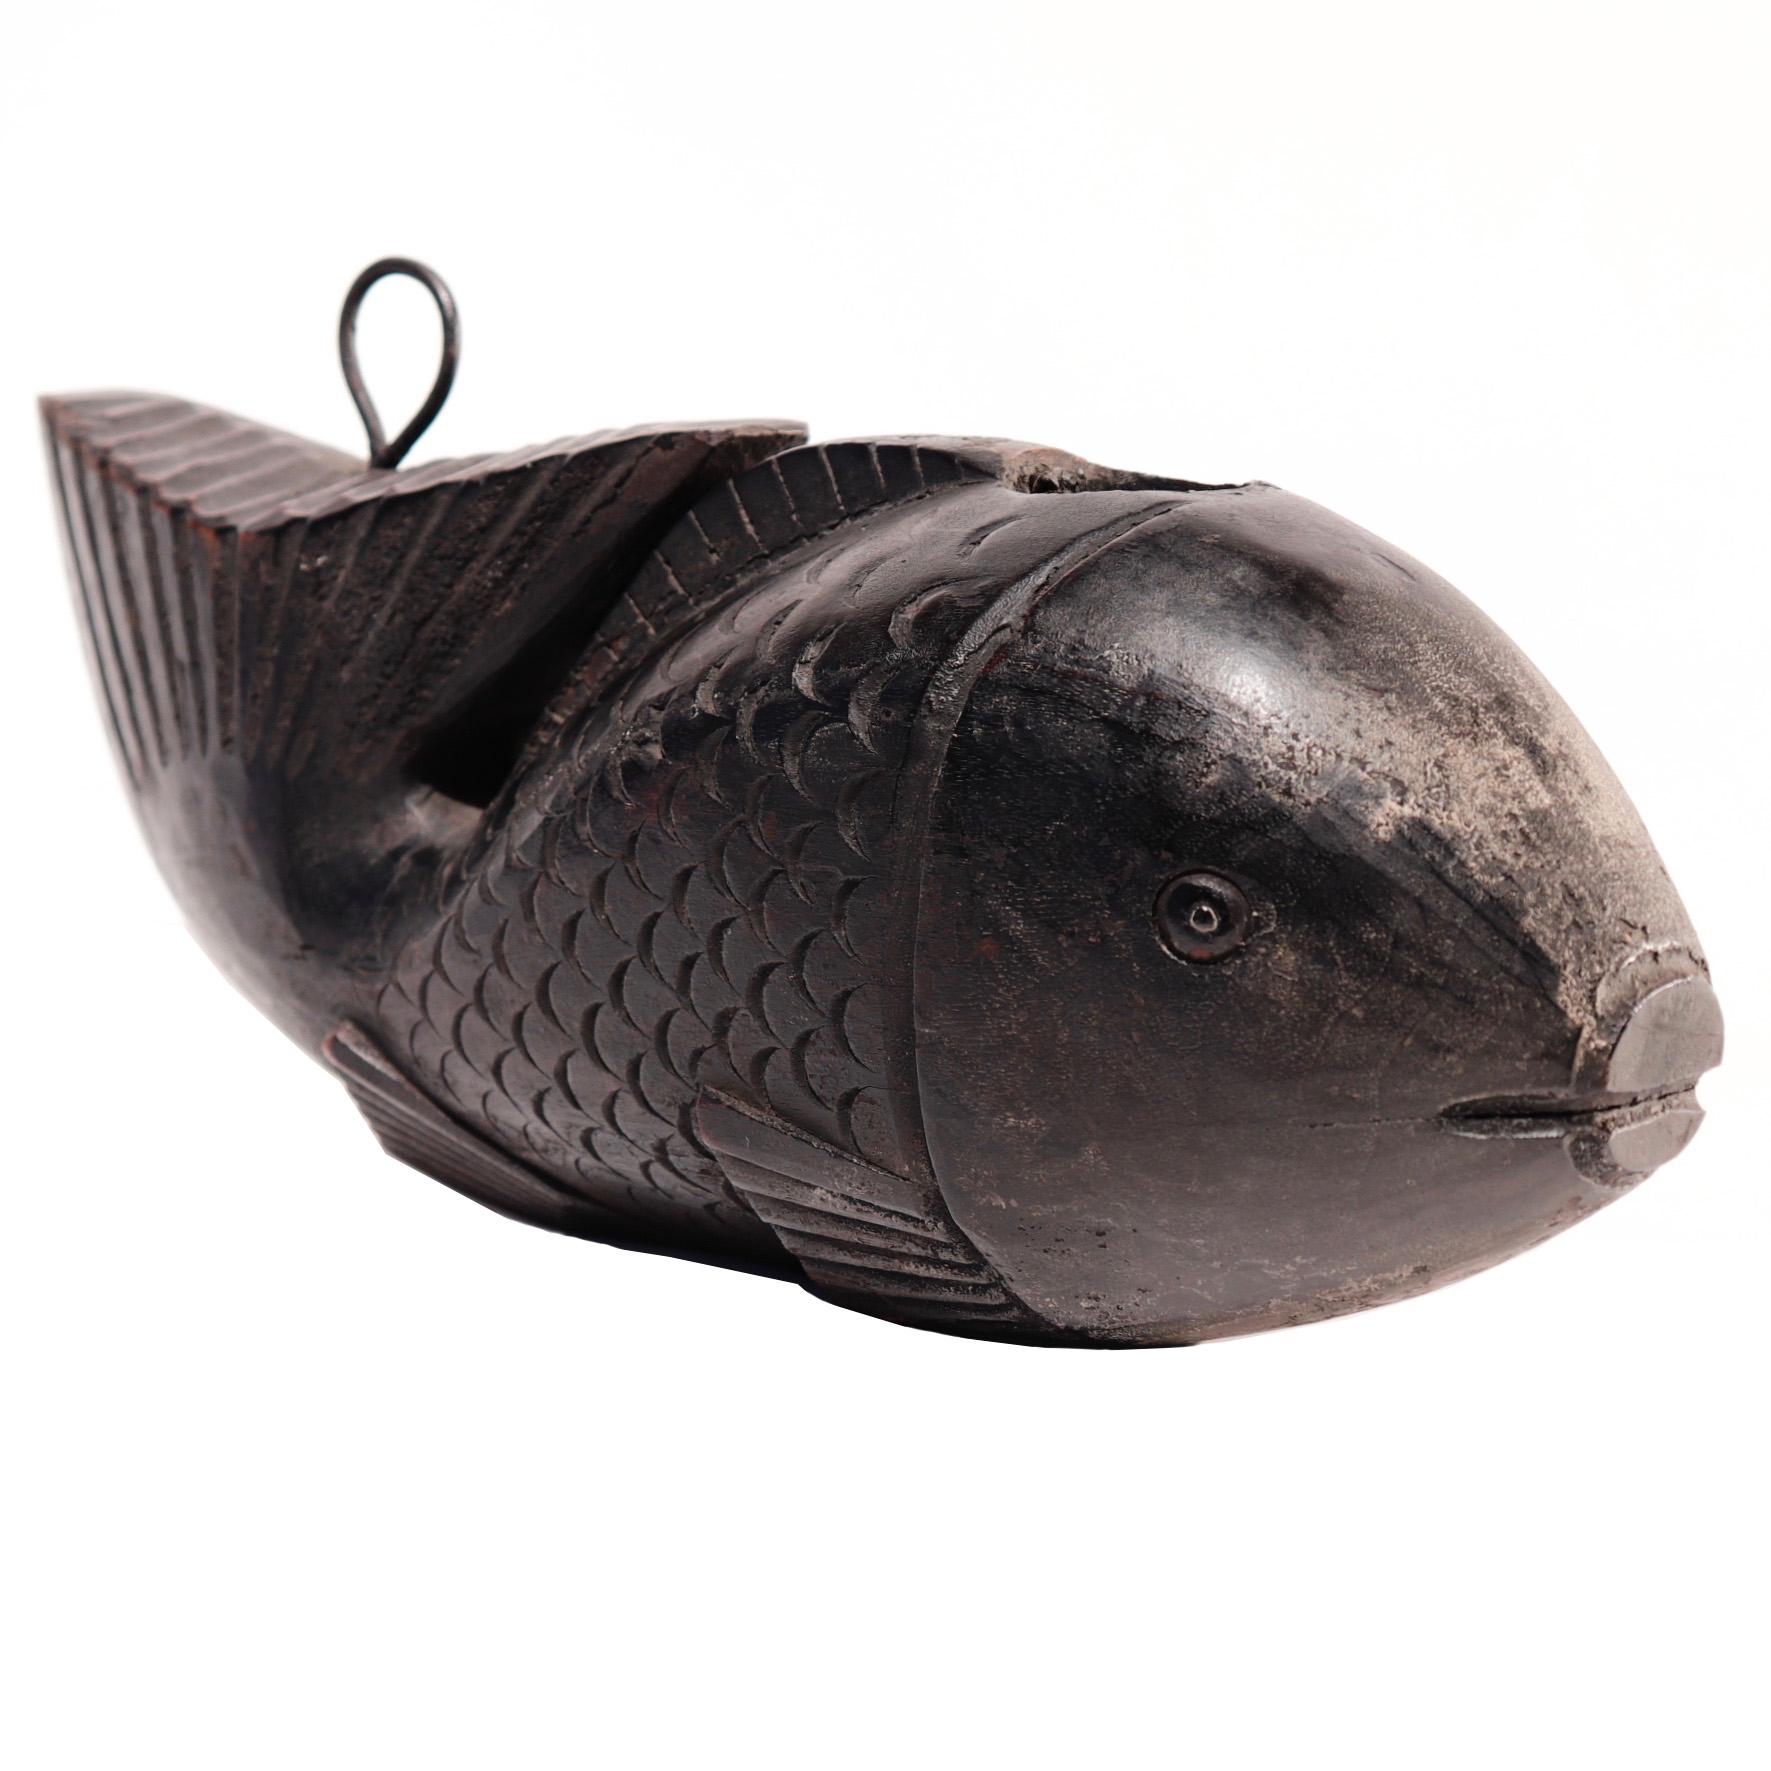 Japanese Yokogi, a fish shaped fulcrum for the pot hook assembly over the hearth, a naively carved Tai (Sea Bream) with large head pierced for the hooked pole and the large tail pointed upward with a metal loop for the cord attachment, light incised